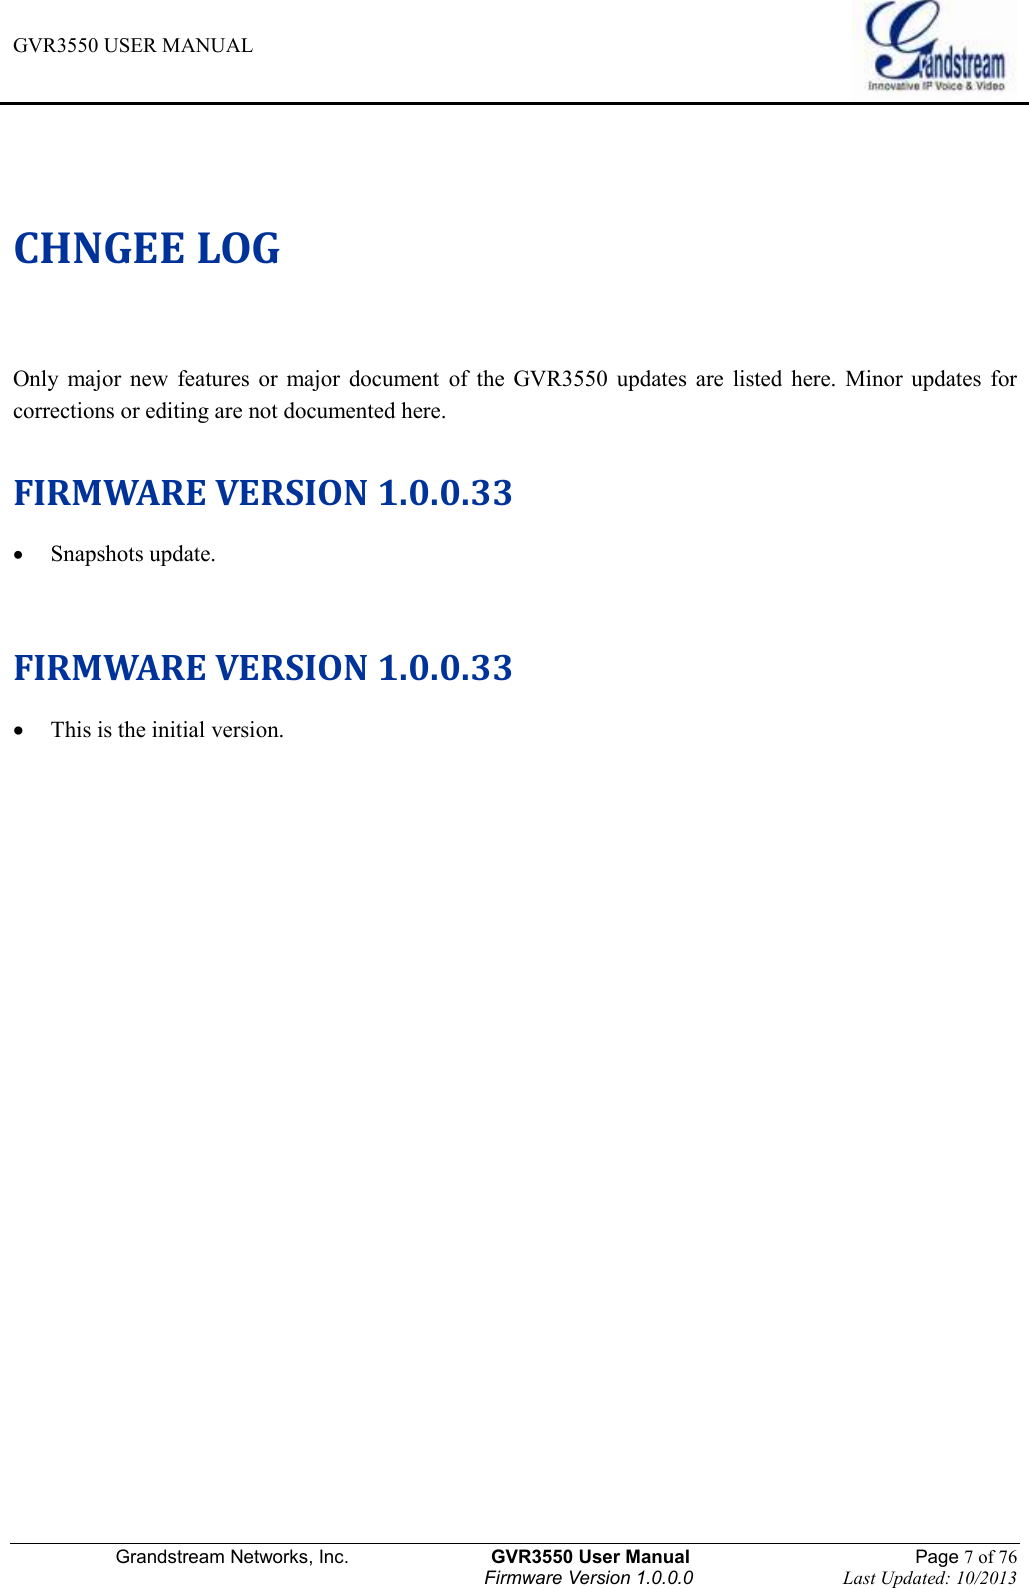 GVR3550 USER MANUAL   Grandstream Networks, Inc.                    GVR3550 User Manual                                                Page 7 of 76 Firmware Version 1.0.0.0                                Last Updated: 10/2013  CHNGEE LOG Only  major  new  features  or  major  document  of  the  GVR3550  updates  are  listed  here.  Minor  updates  for corrections or editing are not documented here.  FIRMWARE VERSION 1.0.0.33  Snapshots update.   FIRMWARE VERSION 1.0.0.33  This is the initial version. 